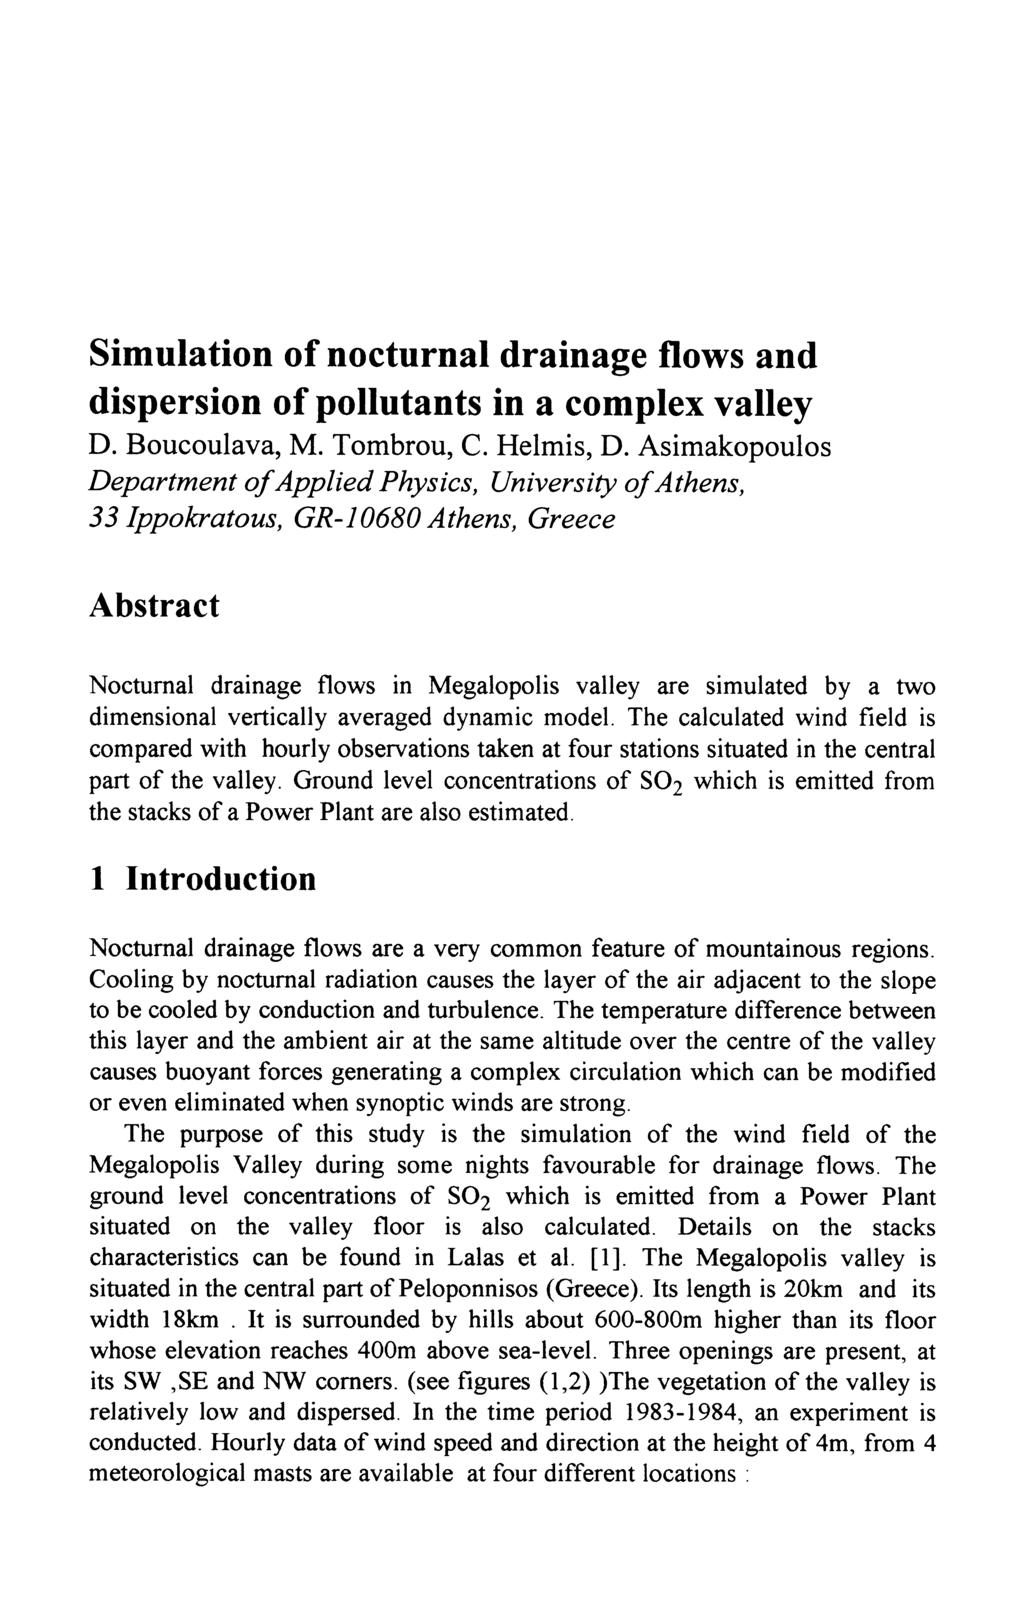 Simulation of nocturnal drainage flows and dispersion of pollutants in a complex valley D. Boucoulava, M. Tombrou, C. Helmis, D.